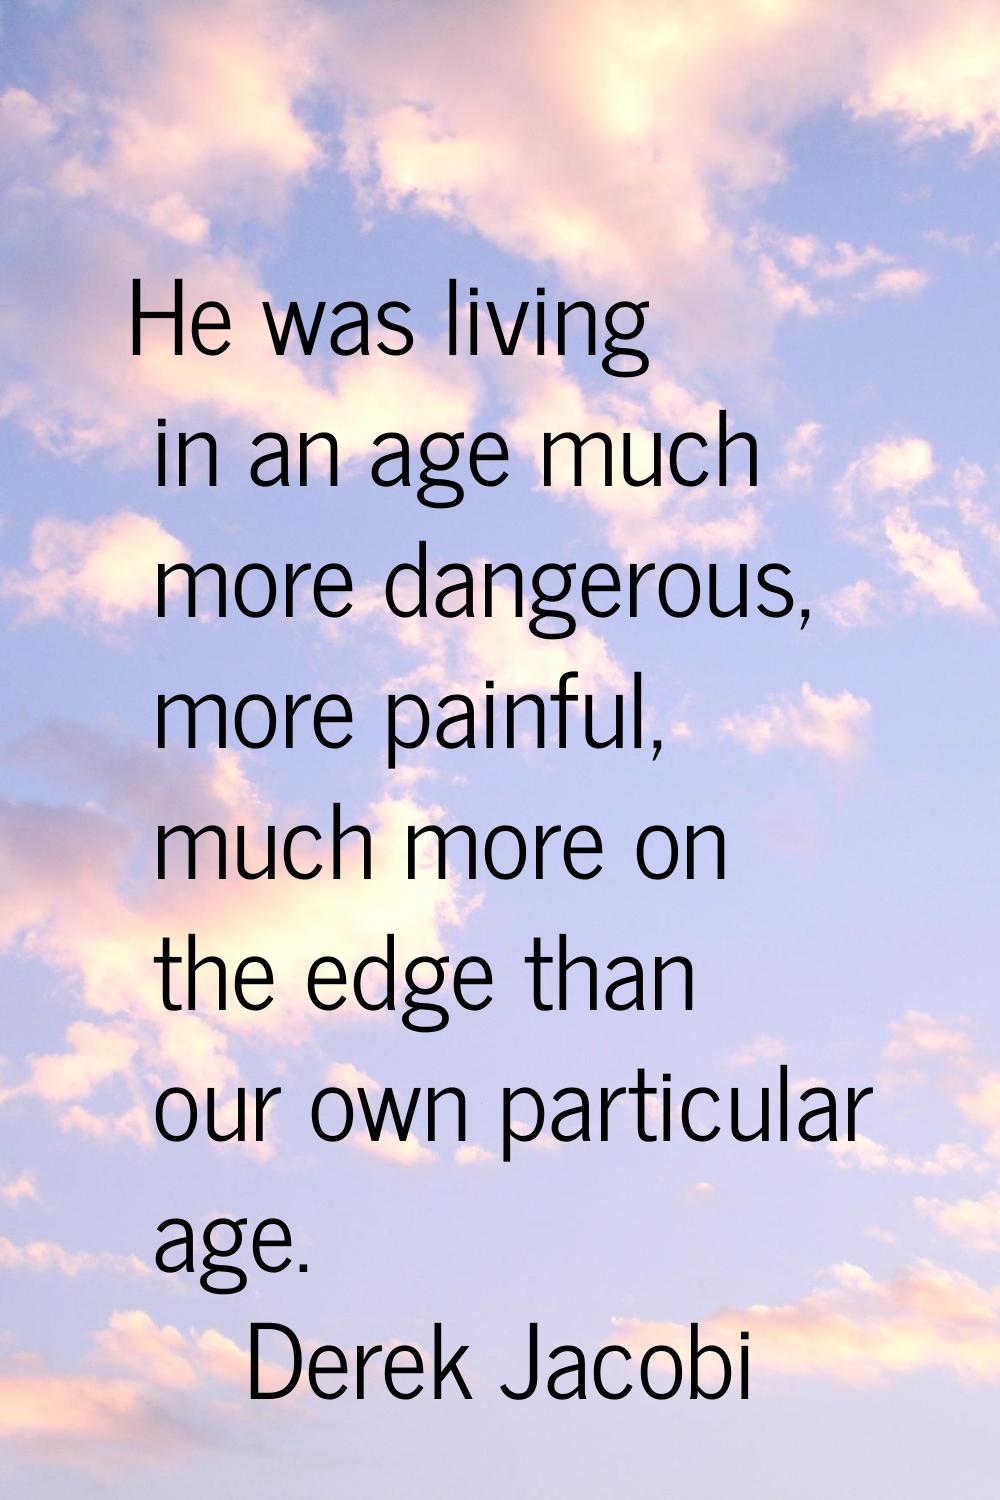 He was living in an age much more dangerous, more painful, much more on the edge than our own parti